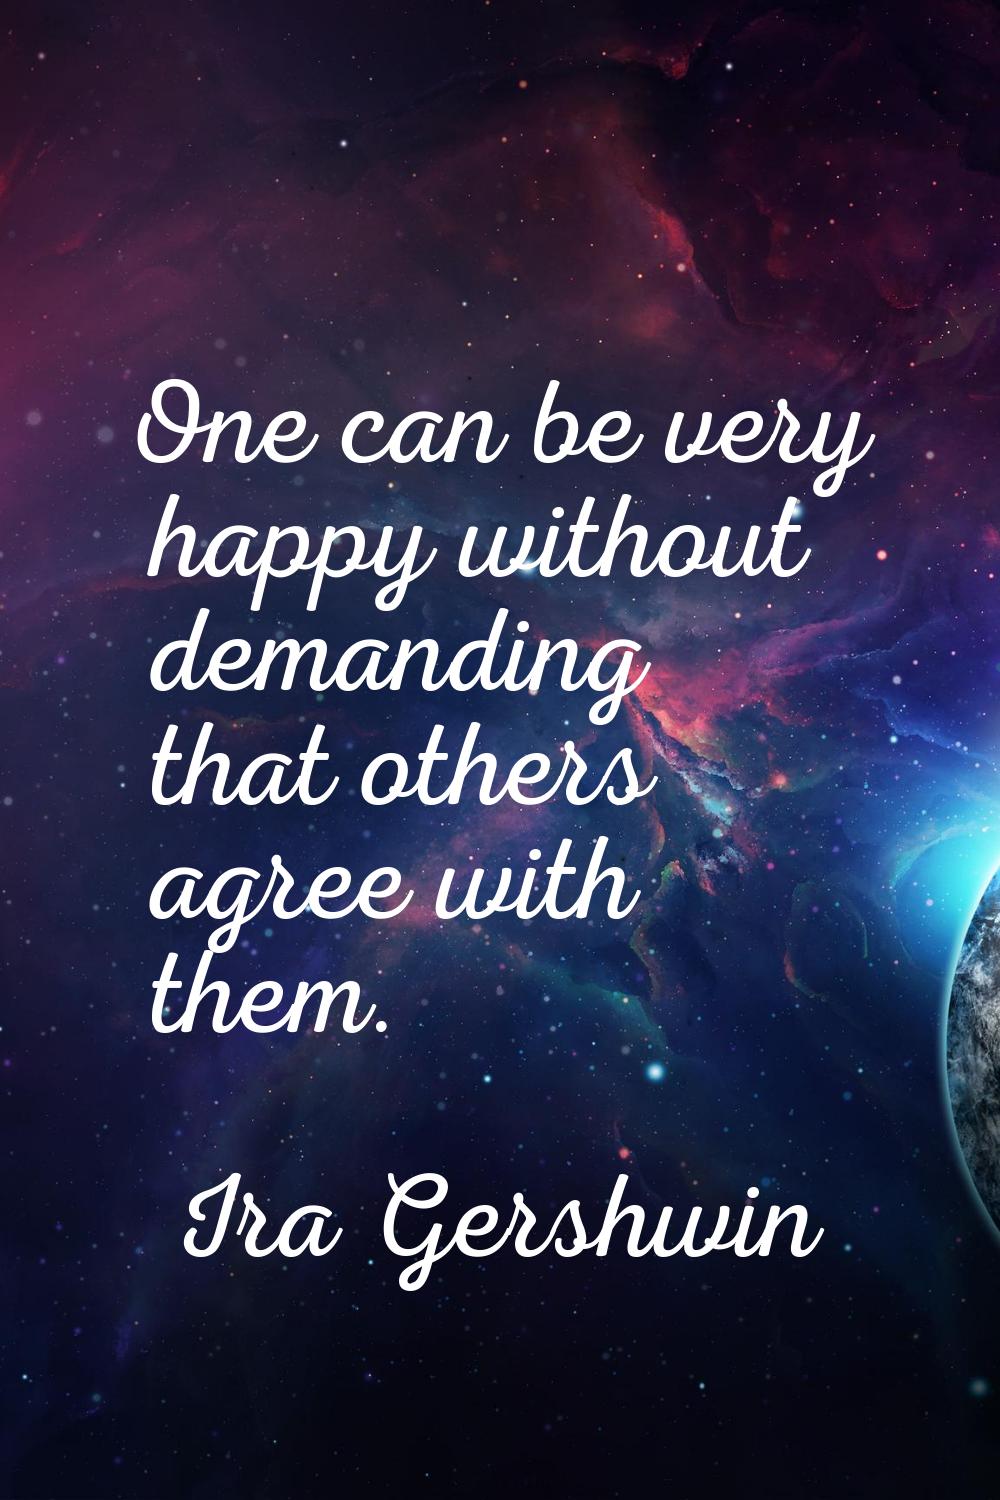 One can be very happy without demanding that others agree with them.